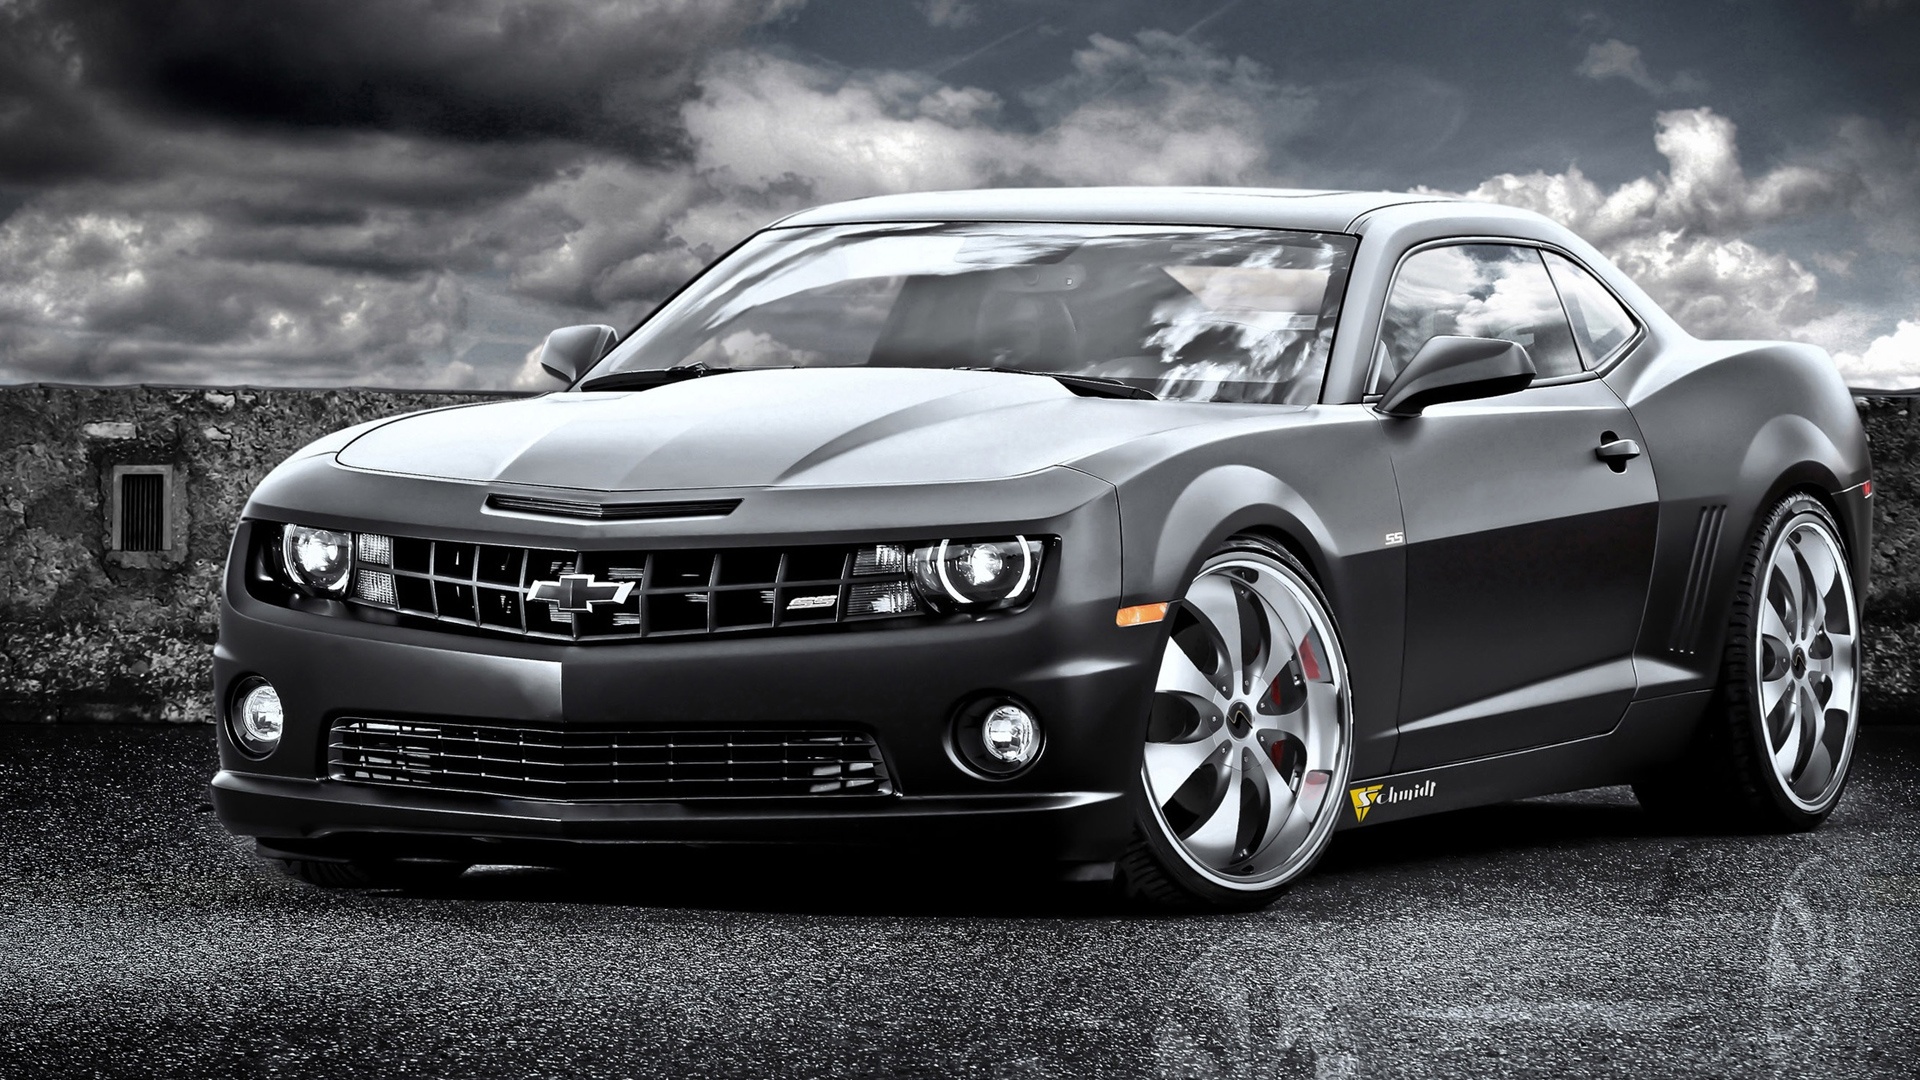 Chevrolet Camaro SS Wallpapers HD Wallpapers